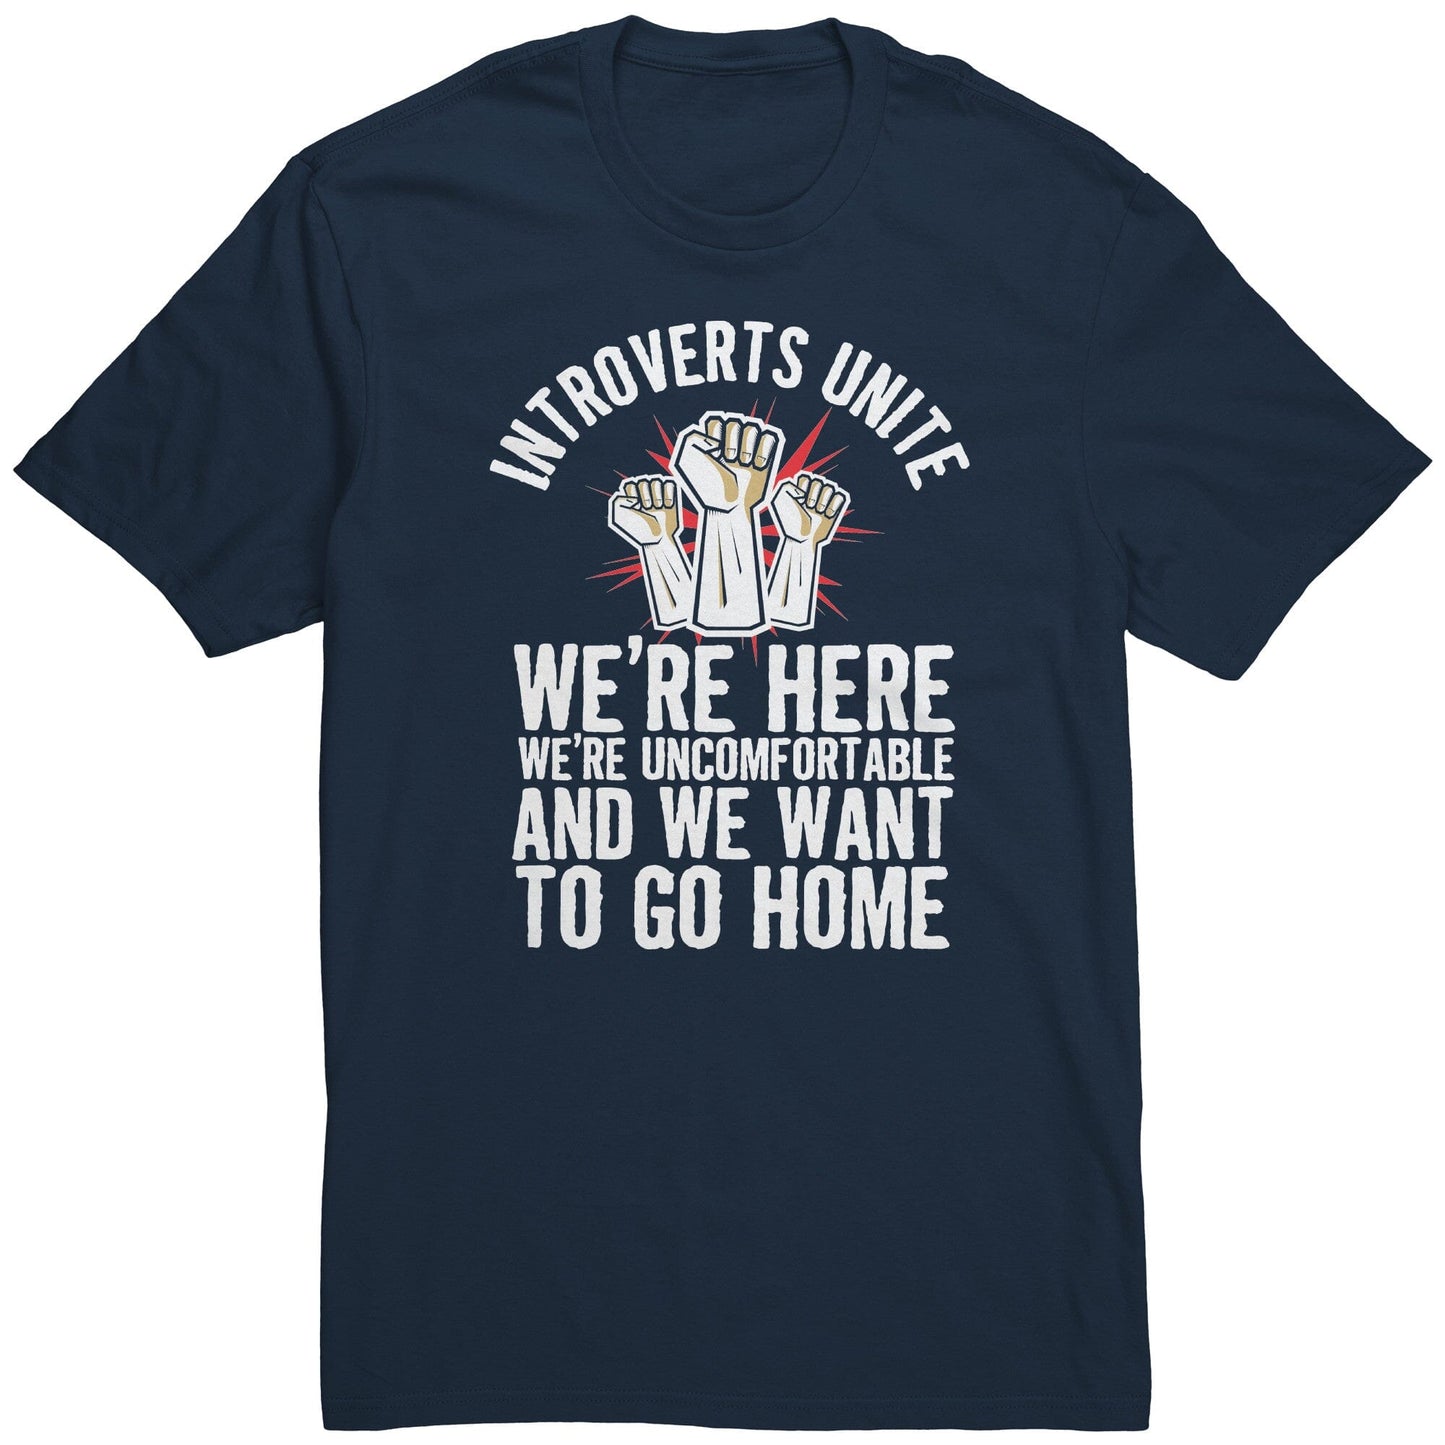 Funny "Introverts Unite - We're Here, We're Uncomfortable, and We Want To Go Home" Shirt Apparel Navy S 